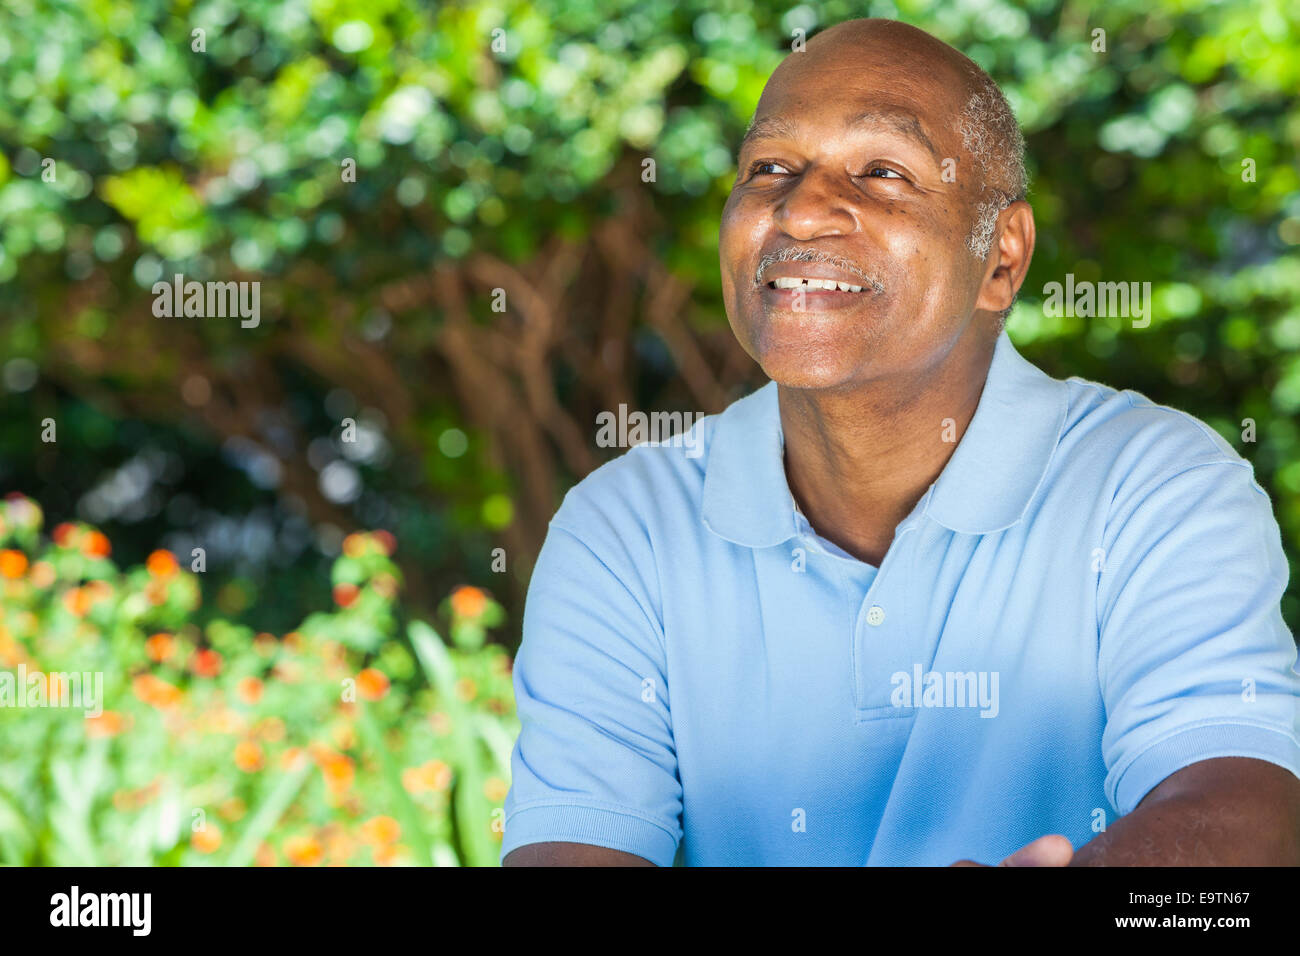 A happy senior African American man in his sixties outside smiling Stock Photo